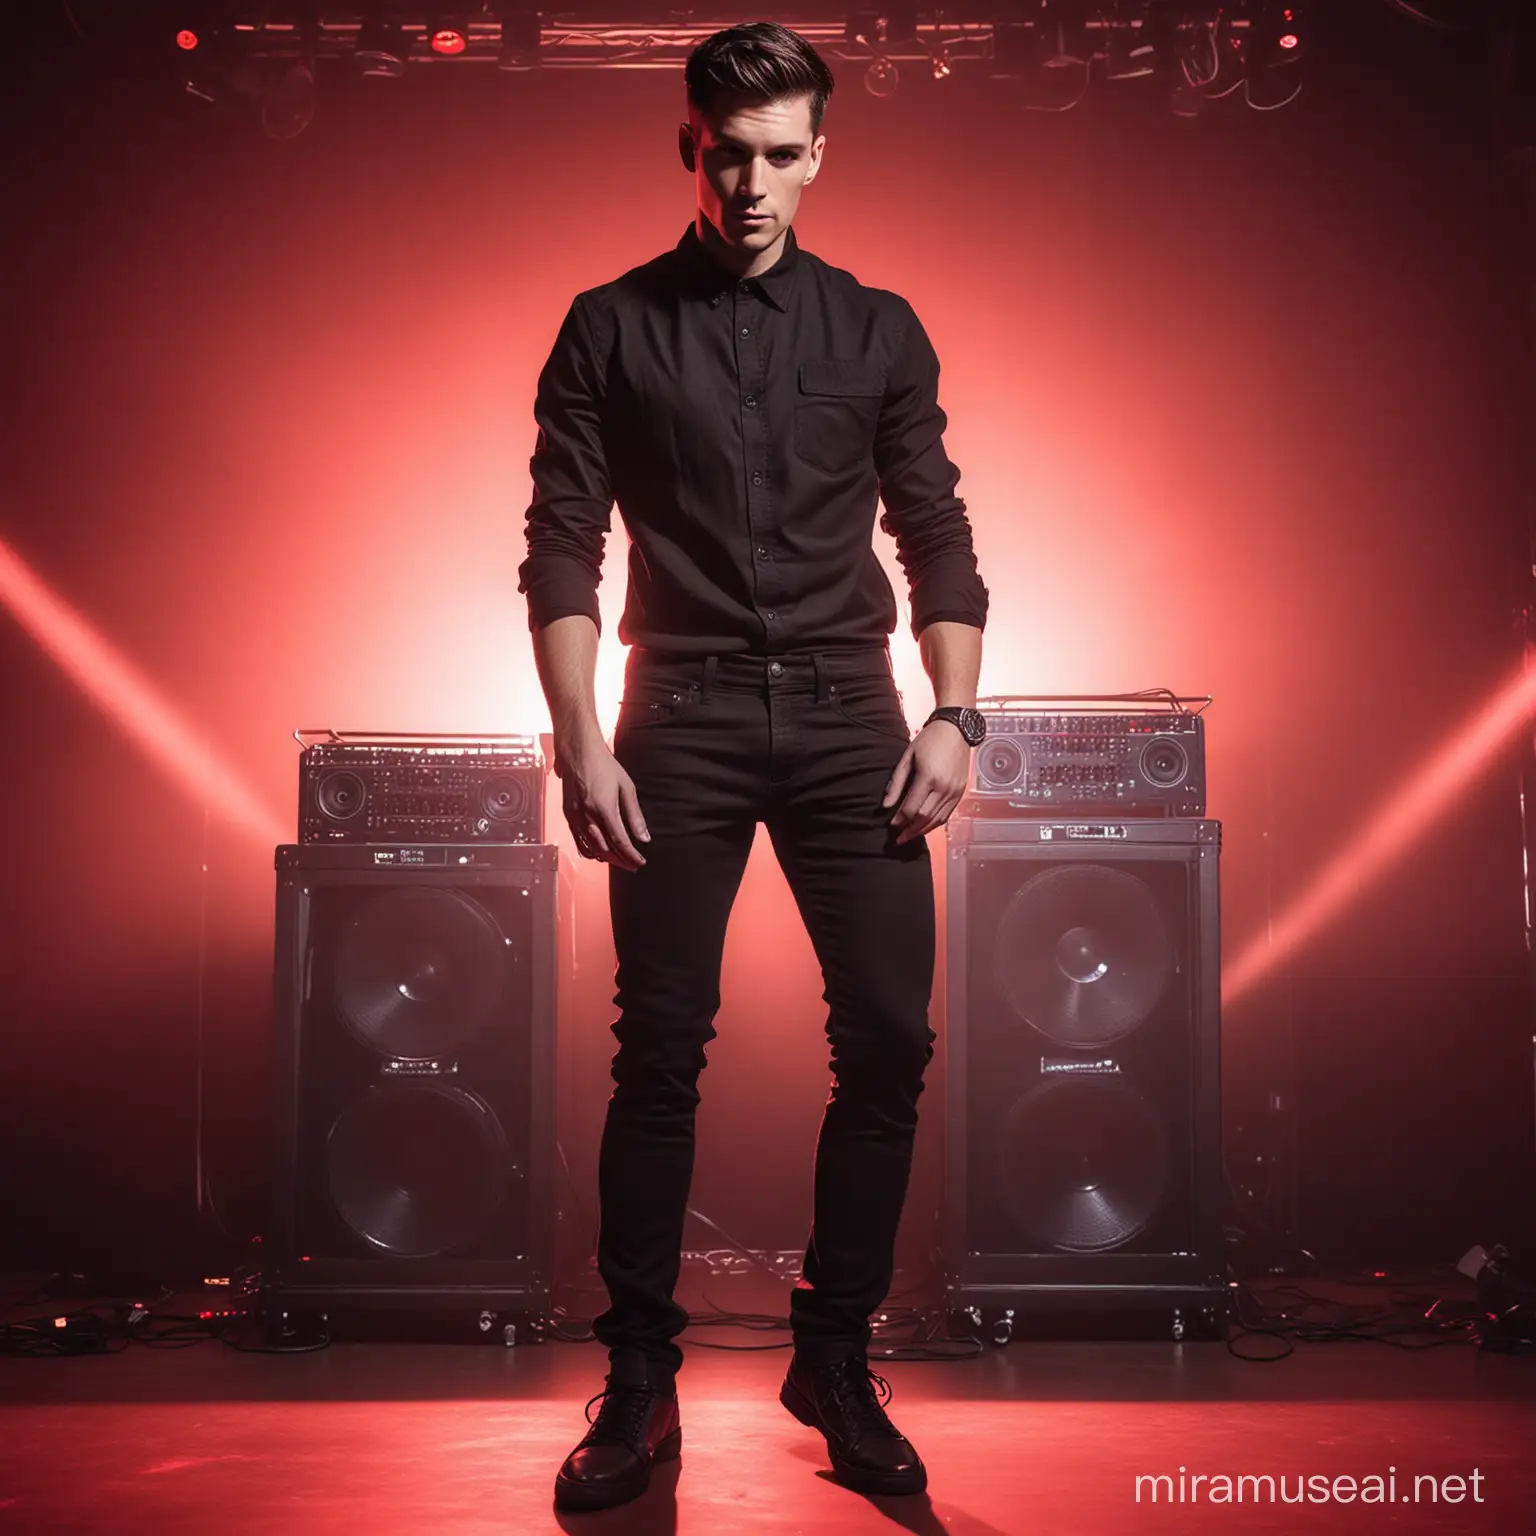 A professional photograph of a man in all black modern clothing, slim black jeans, black shoes and short hair, behind a DJ setup on a stage with bold red lighting 